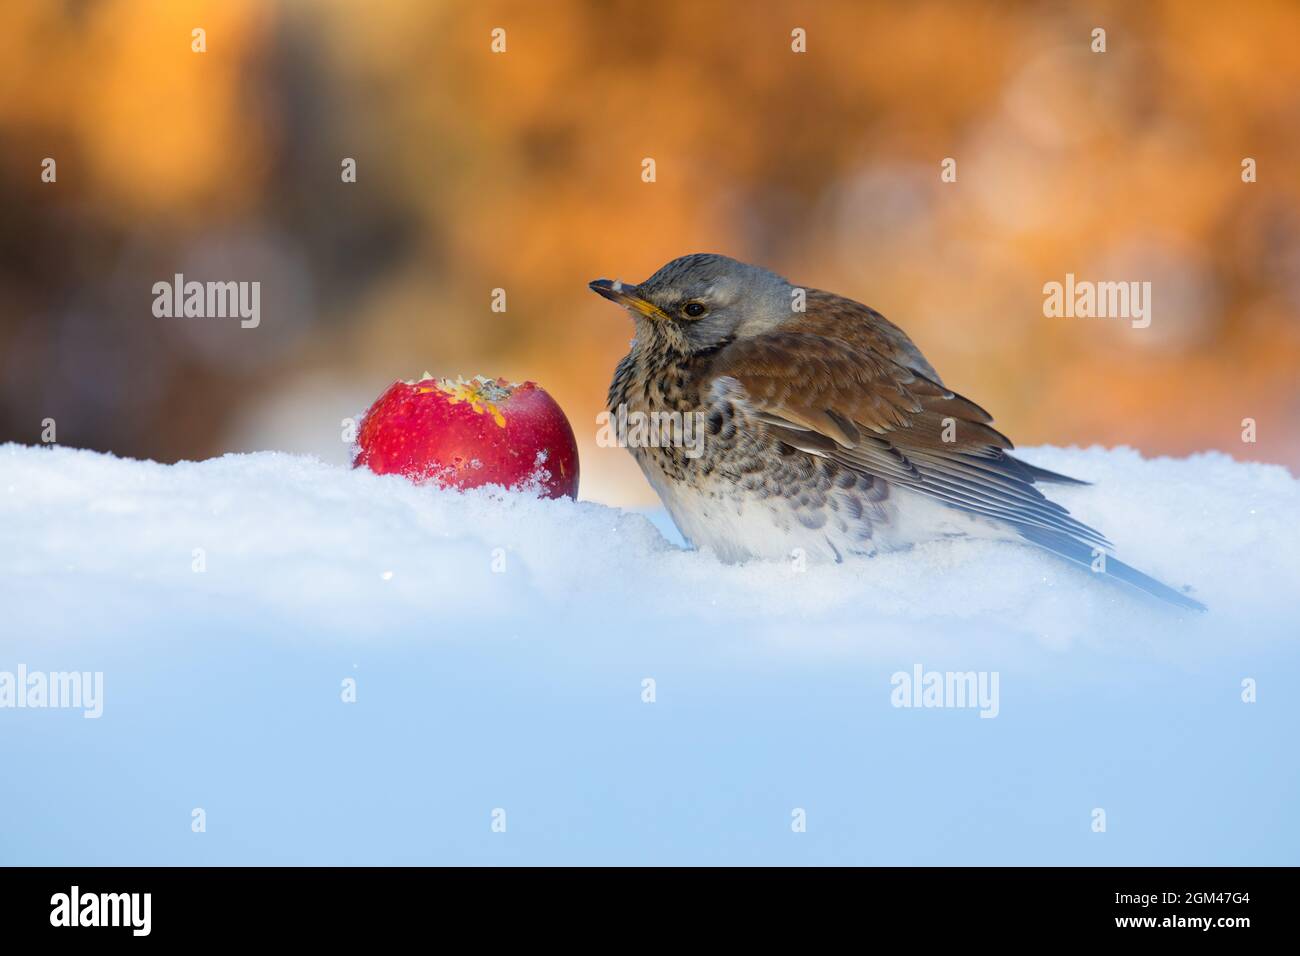 Fieldfare (Turdus pilaris) in winter feeding on an apple. It is a migrating species in some parts of Europe. Photographed in Denmark Stock Photo